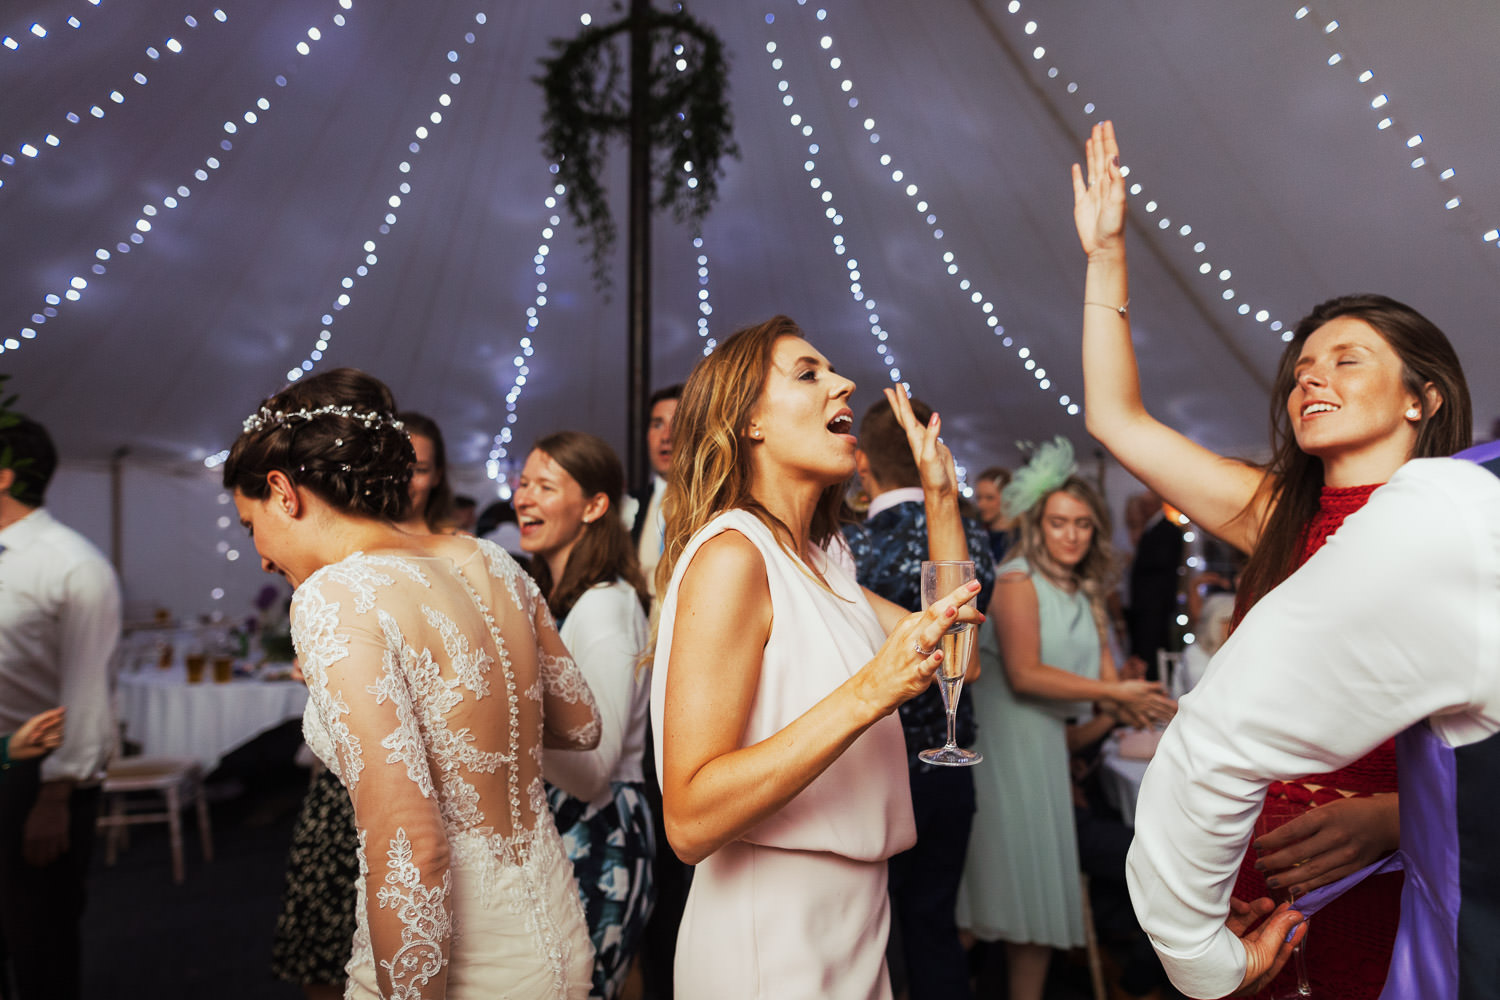 Women singing and dancing in a marquee.